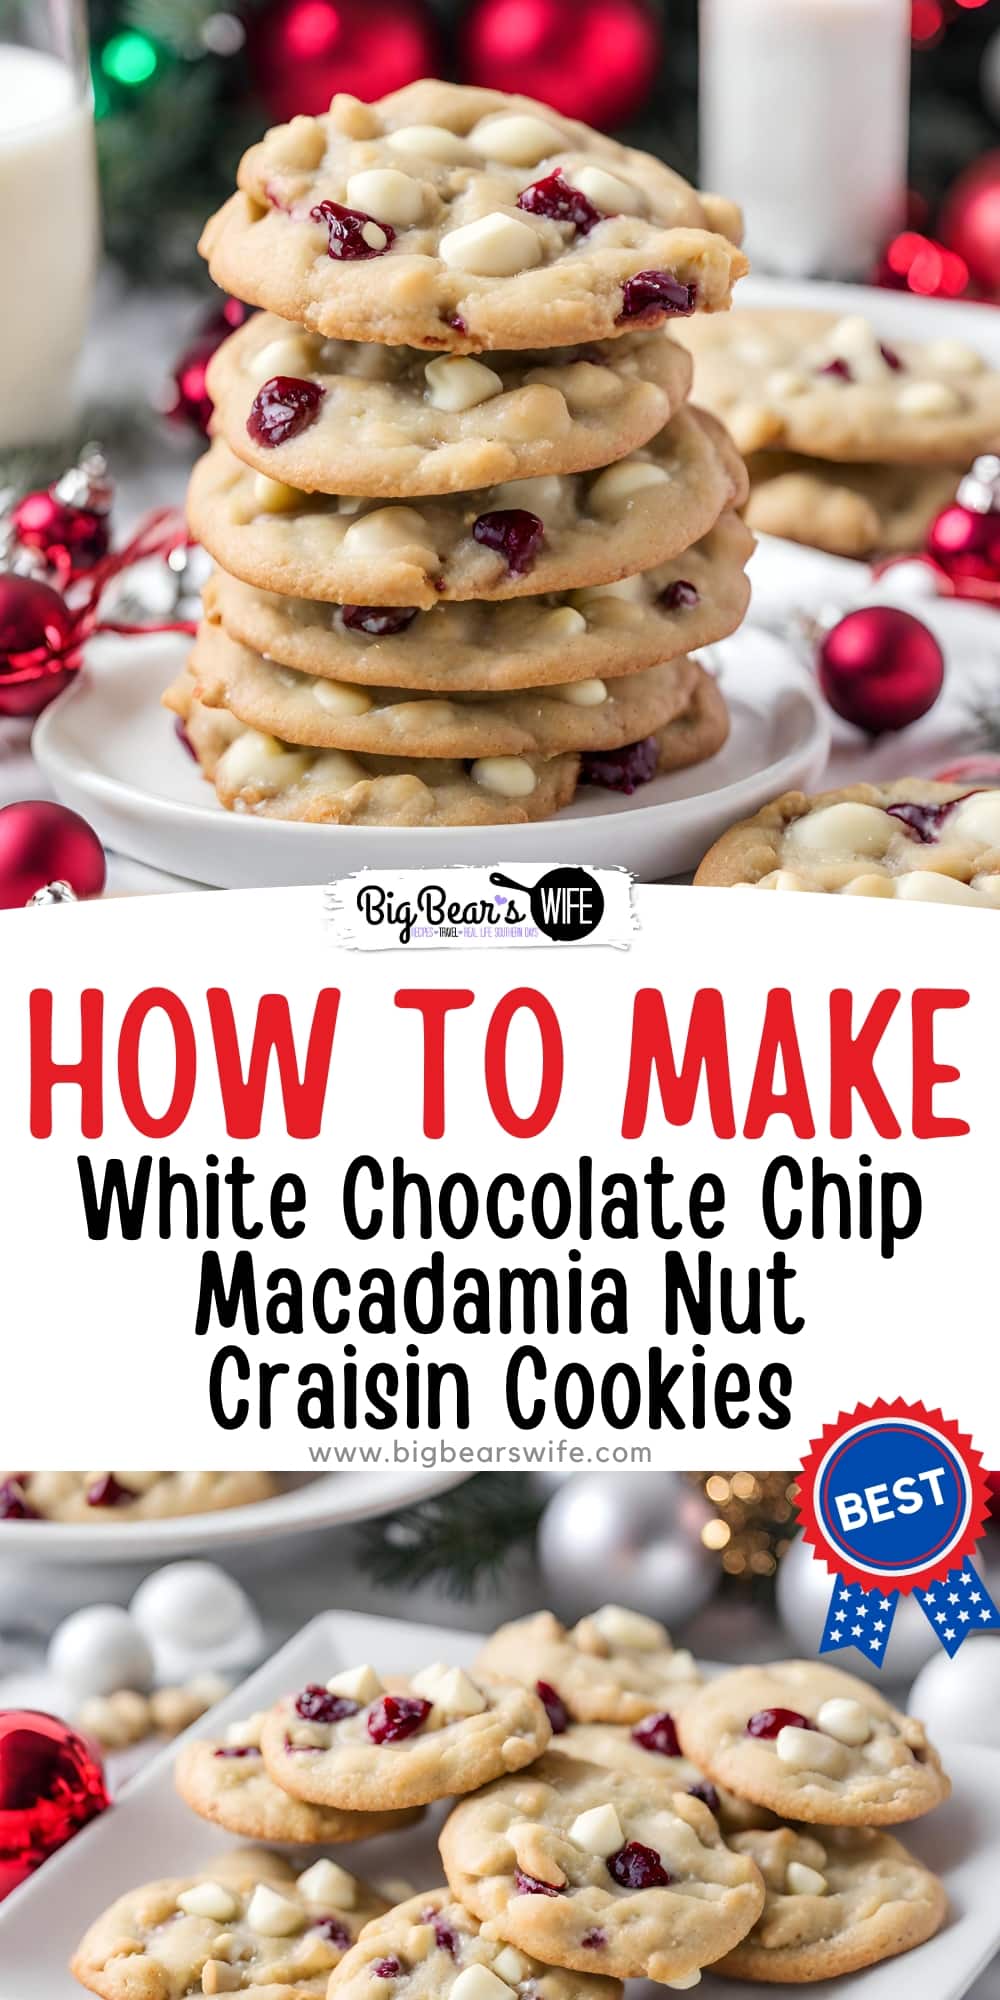 Looking for a new addition to your cookie collection? Look no further! Discover the magic of white chocolate chip macadamia nut craisin cookies and why they deserve a spot in your baking repertoire. With their irresistible combination of creamy white chocolate, buttery macadamia nuts, and tangy craisins, these cookies are sure to become a family favorite. via @bigbearswife